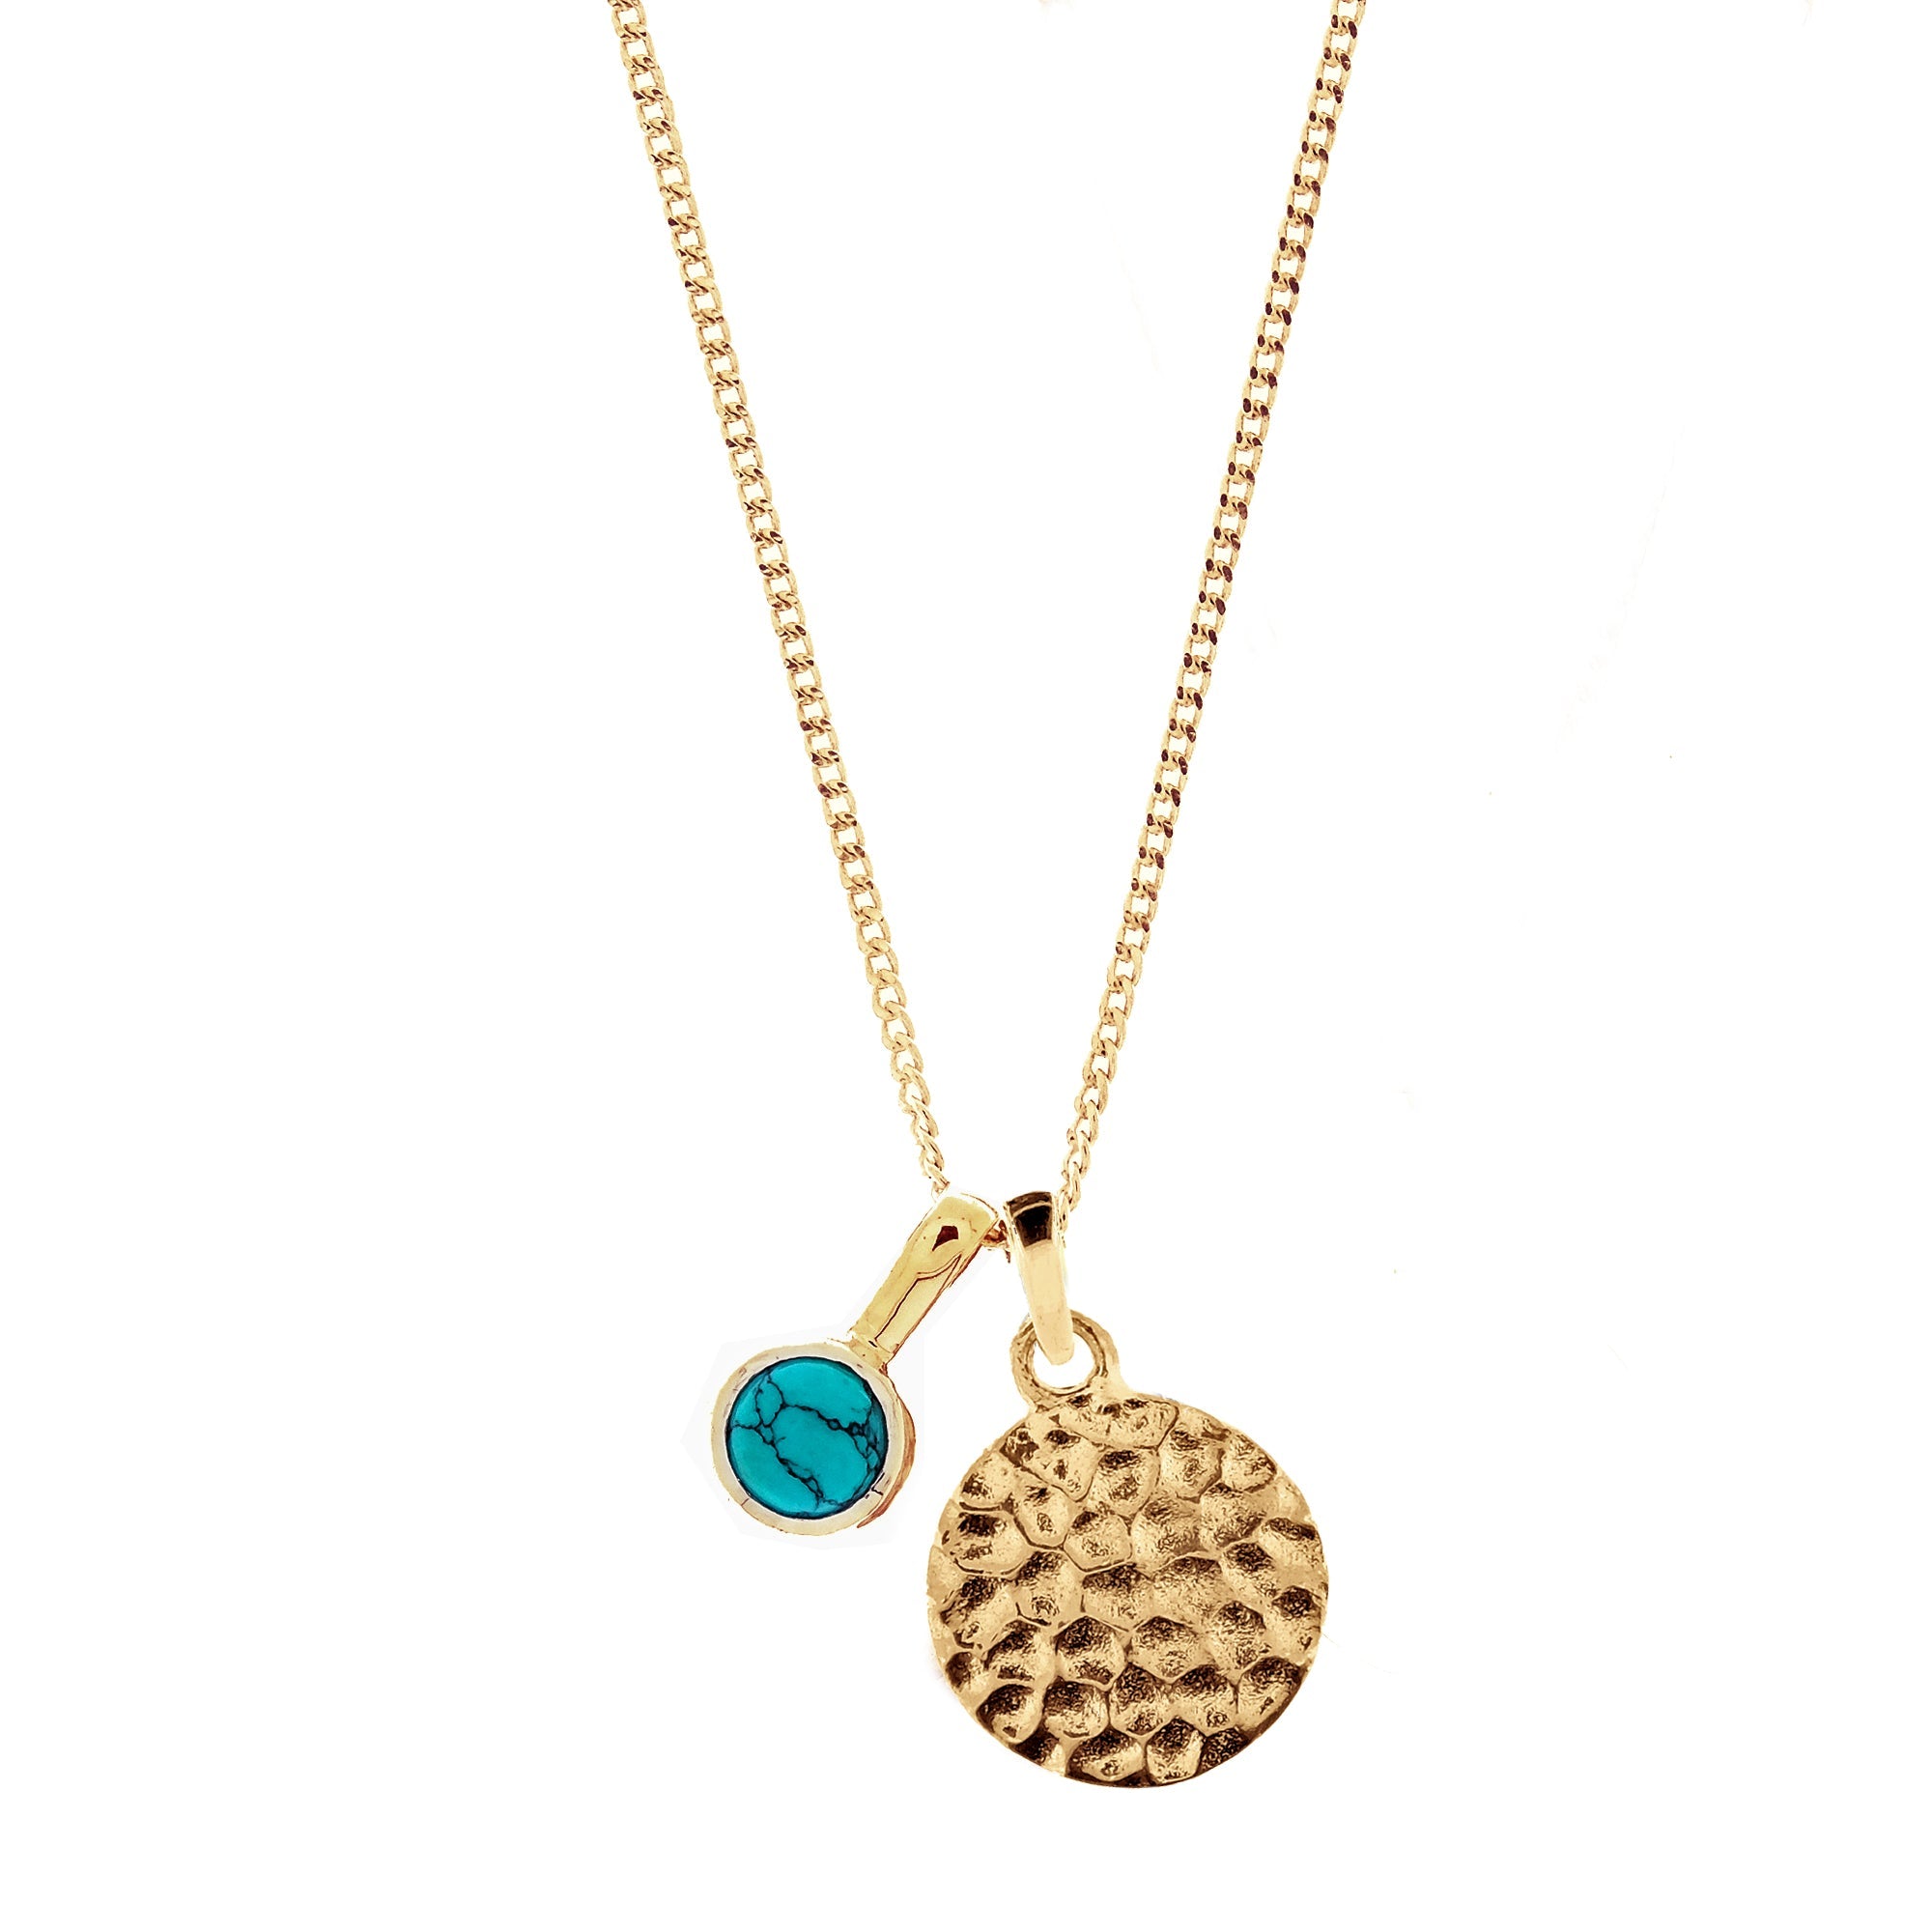 LAKSHMI HAMMERED DISC GOLD NECKLACE WITH TURQUOISE CHARM